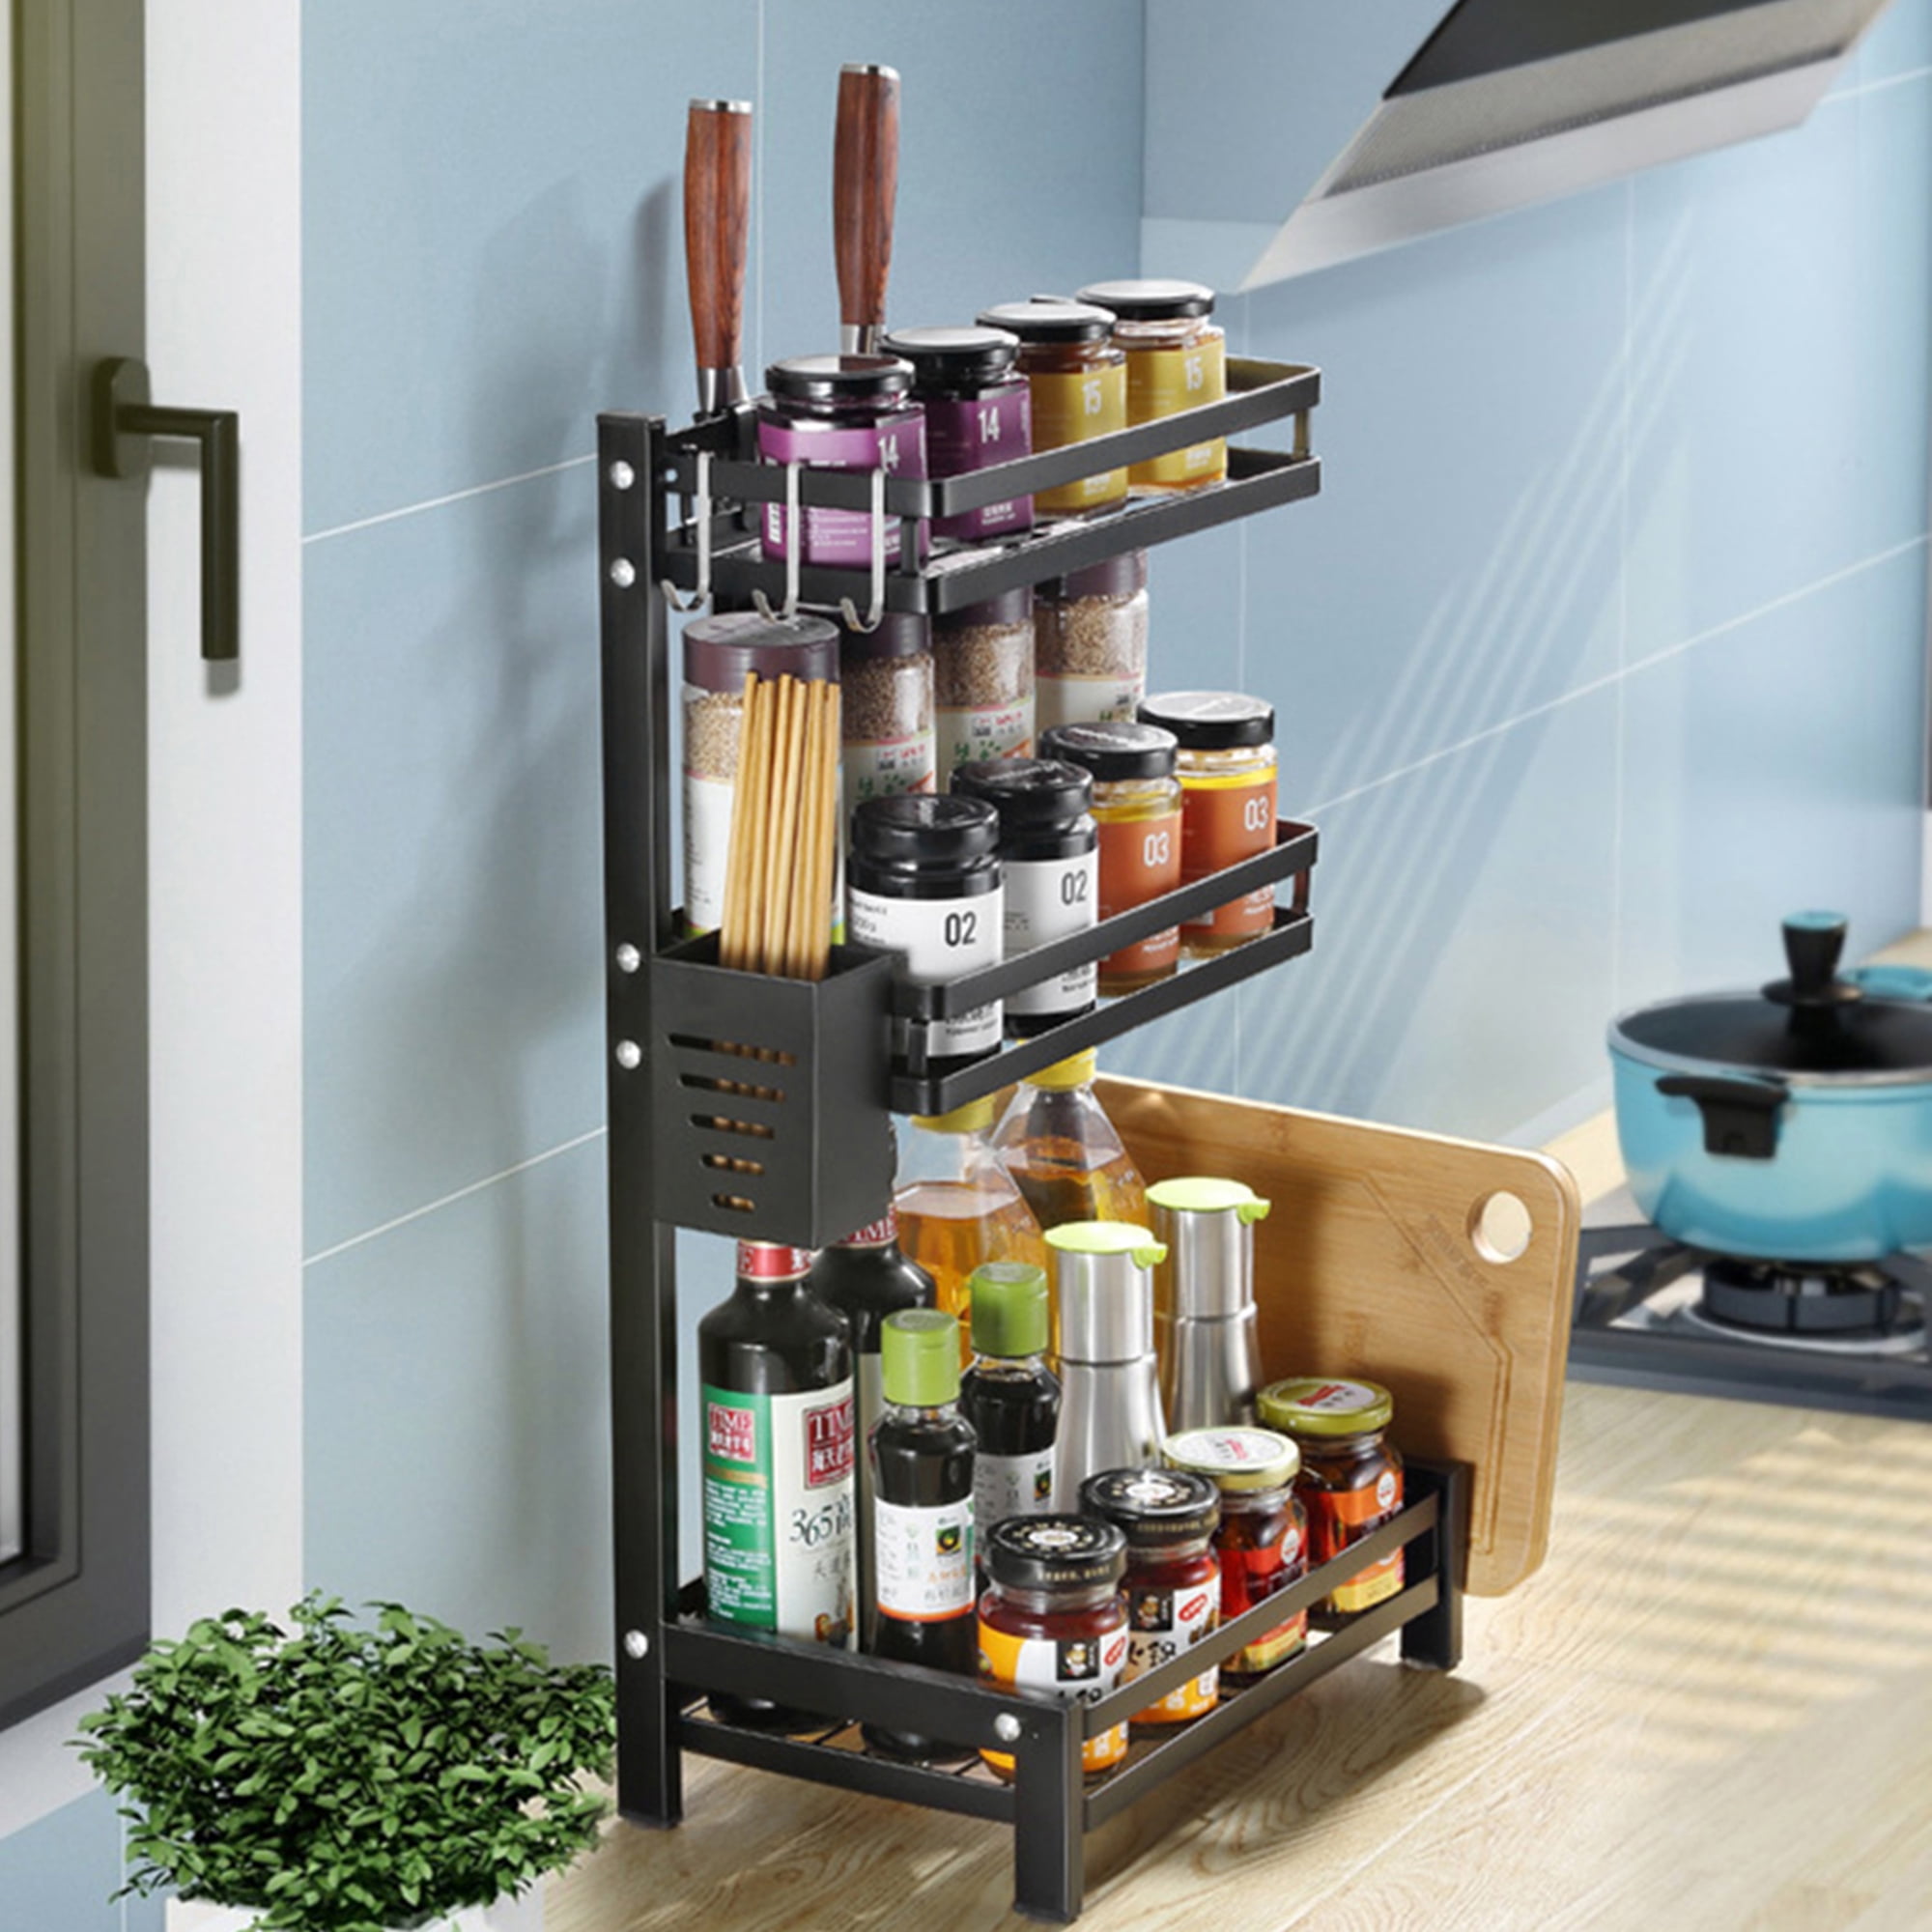 Spice Rack Organizer for Countertop Metal Wire 2 Tier Spice Organizer Storage Holder with Shelf Liner Freestanding for Kitchen Bathroom Cabinet Pantry Office-Bronze-2 Packs 